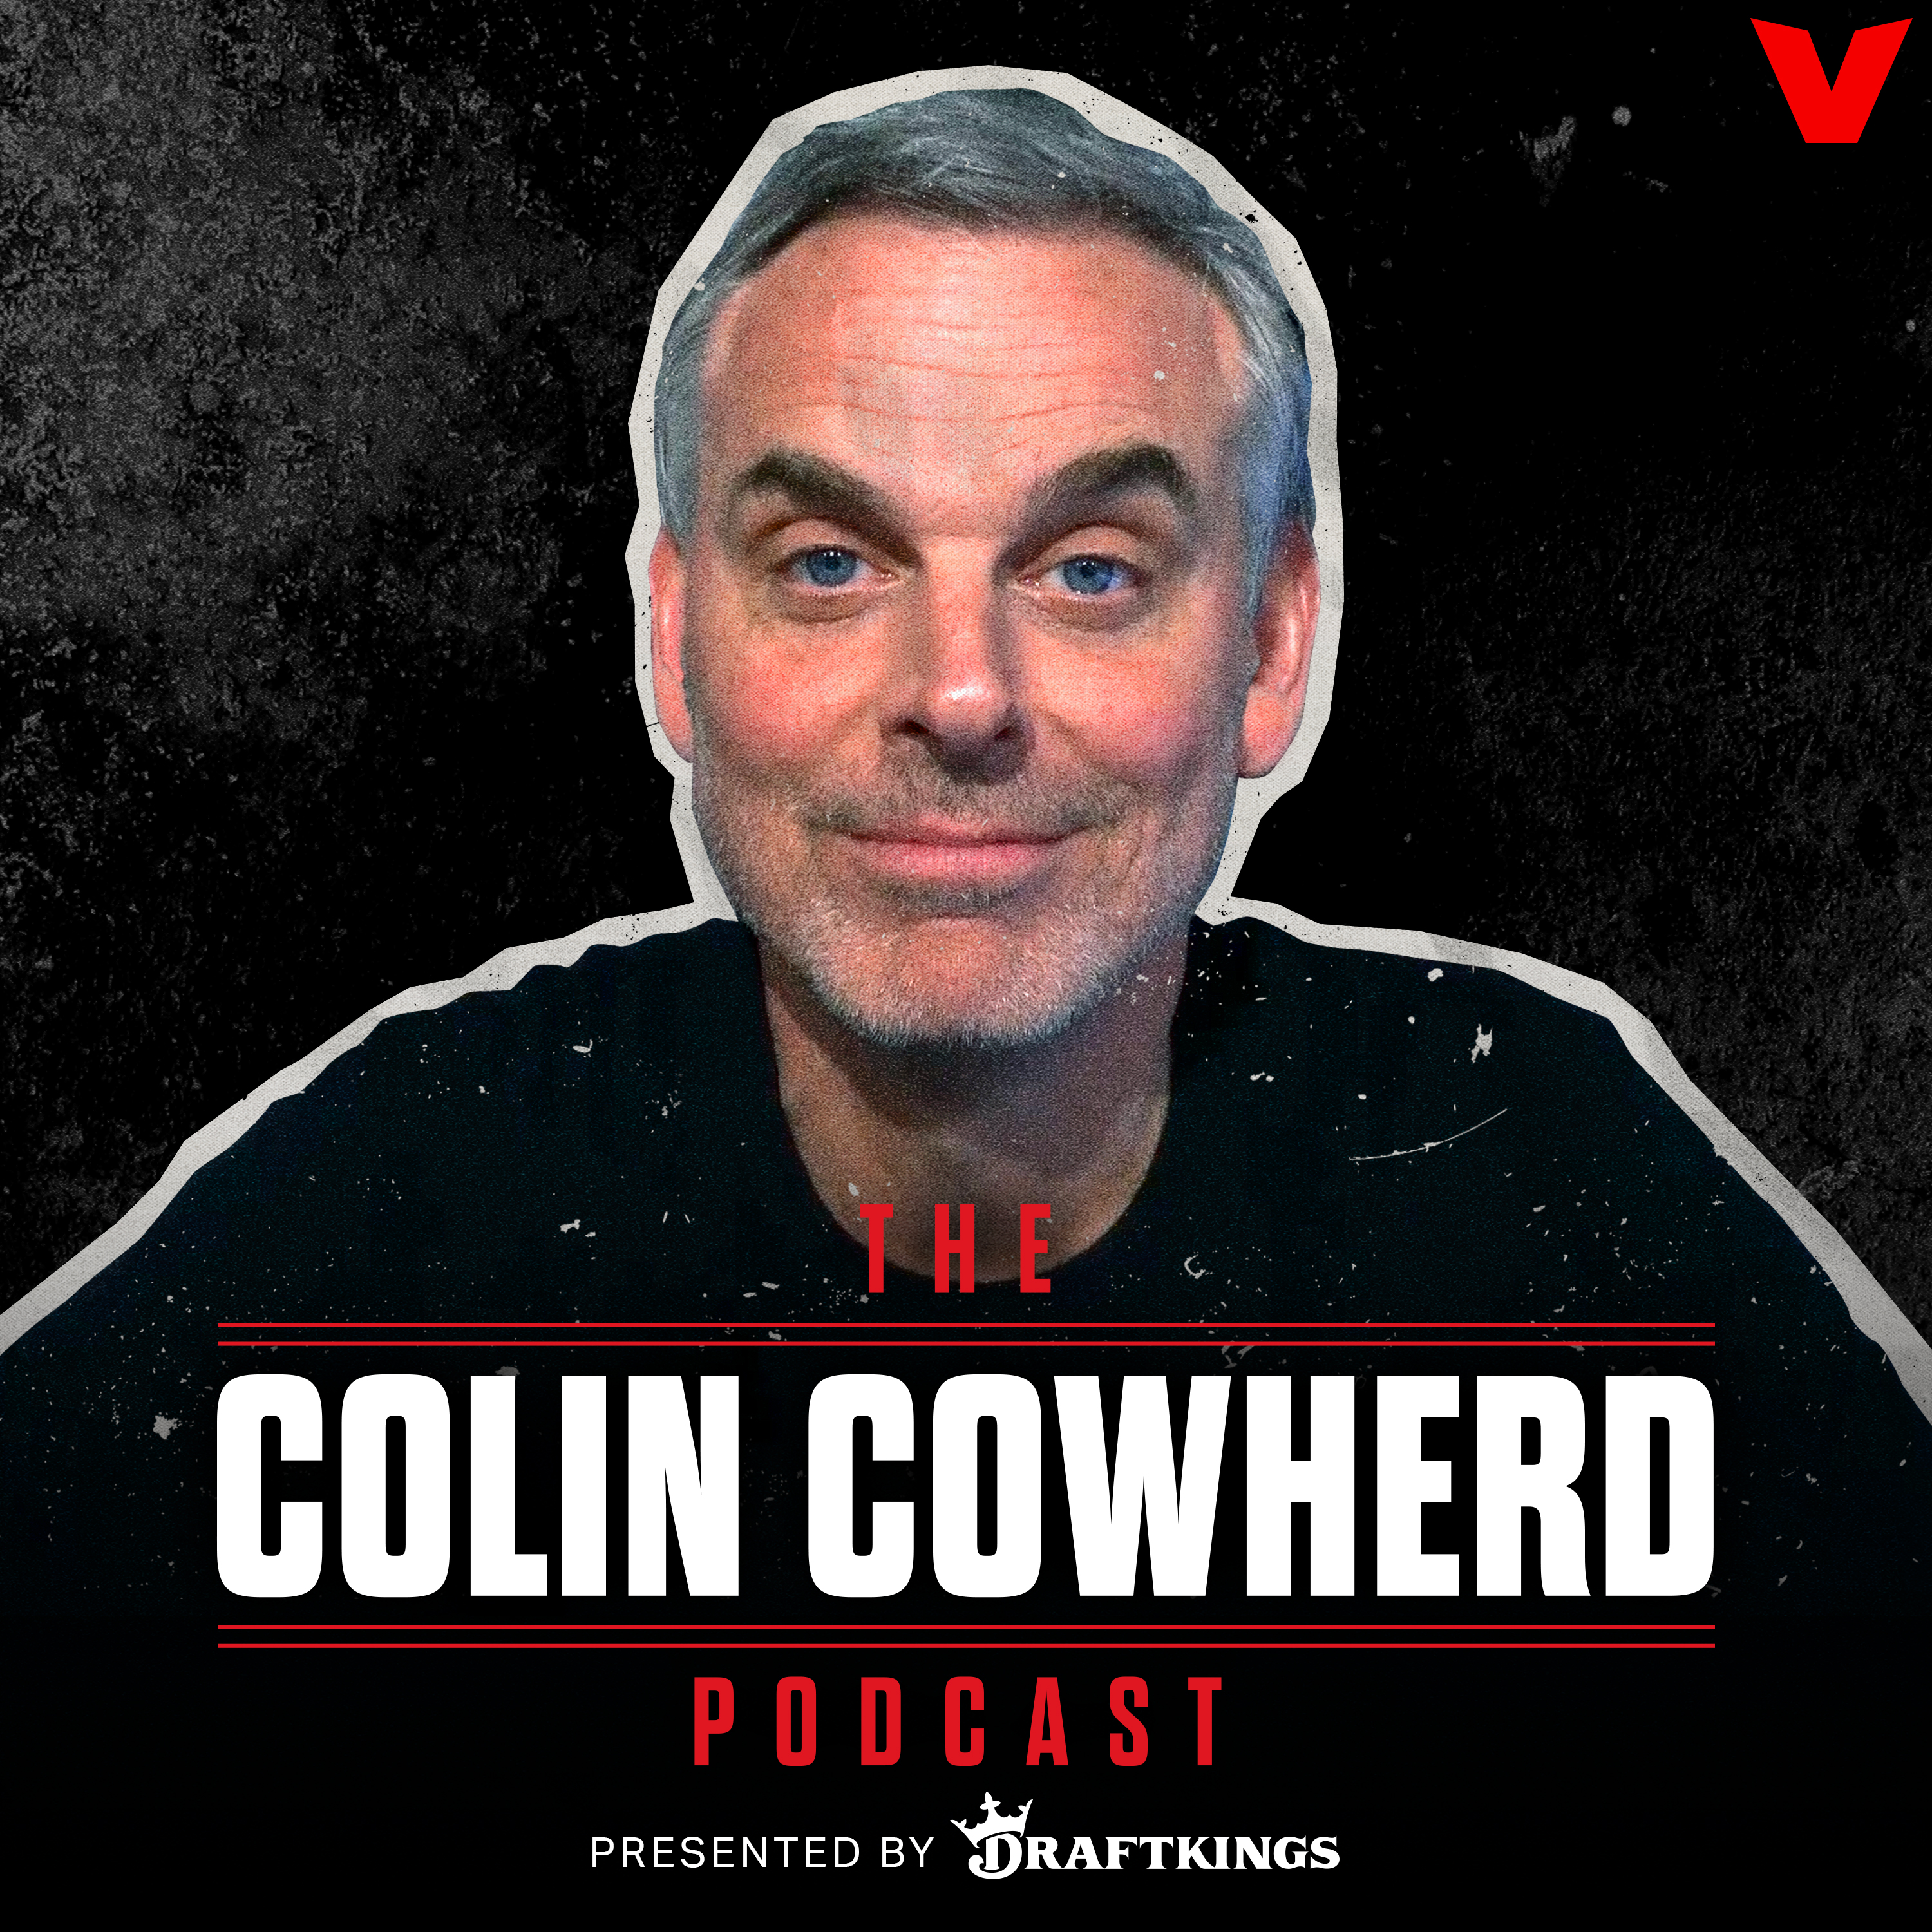 The Colin Cowherd Podcast:iHeartPodcasts and The Volume